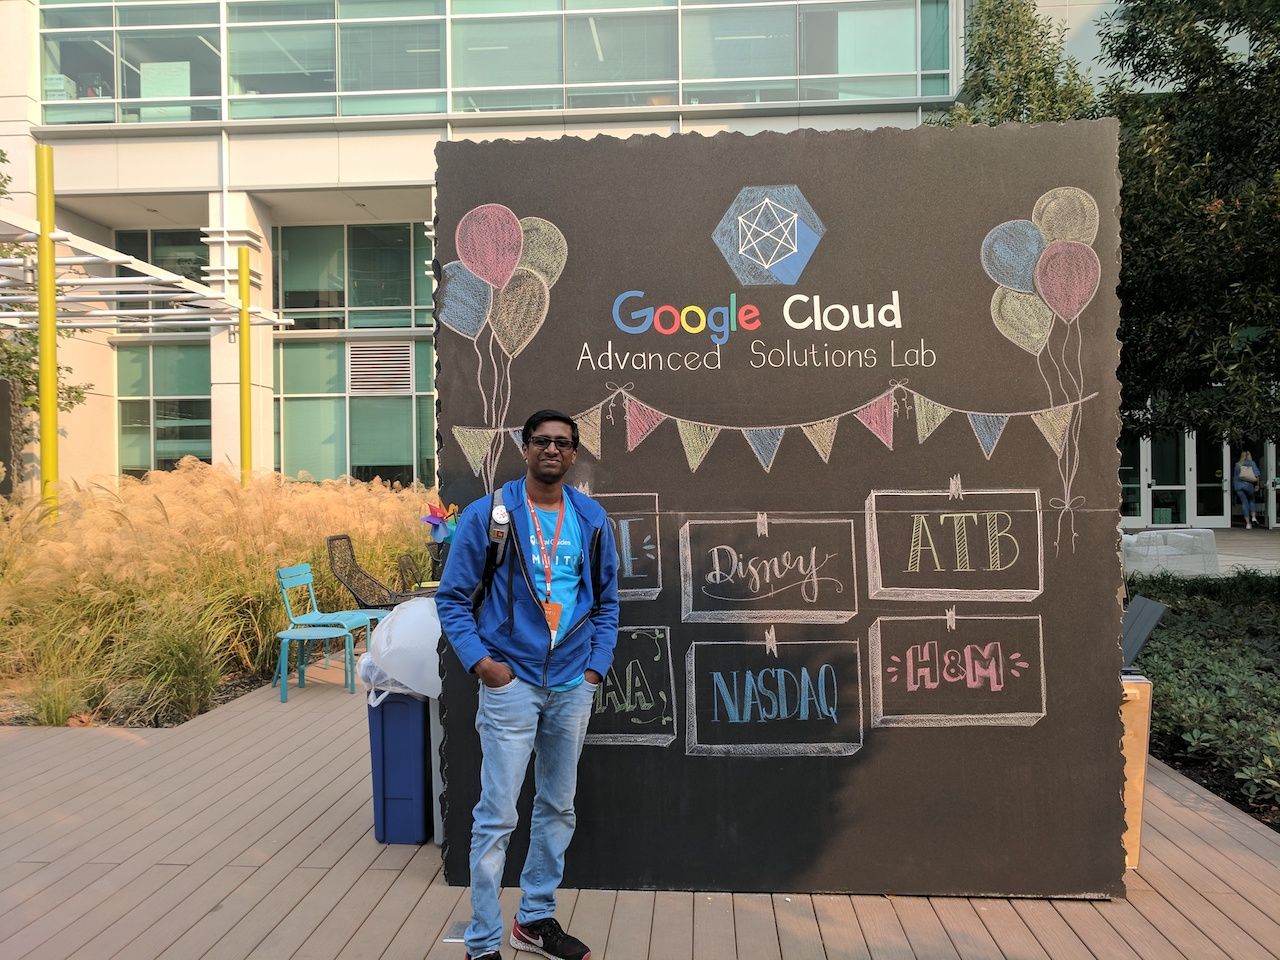 A photo of Local Guide Ilankovan standing in front of a Google Cloud Advanced Solutions Lab sign